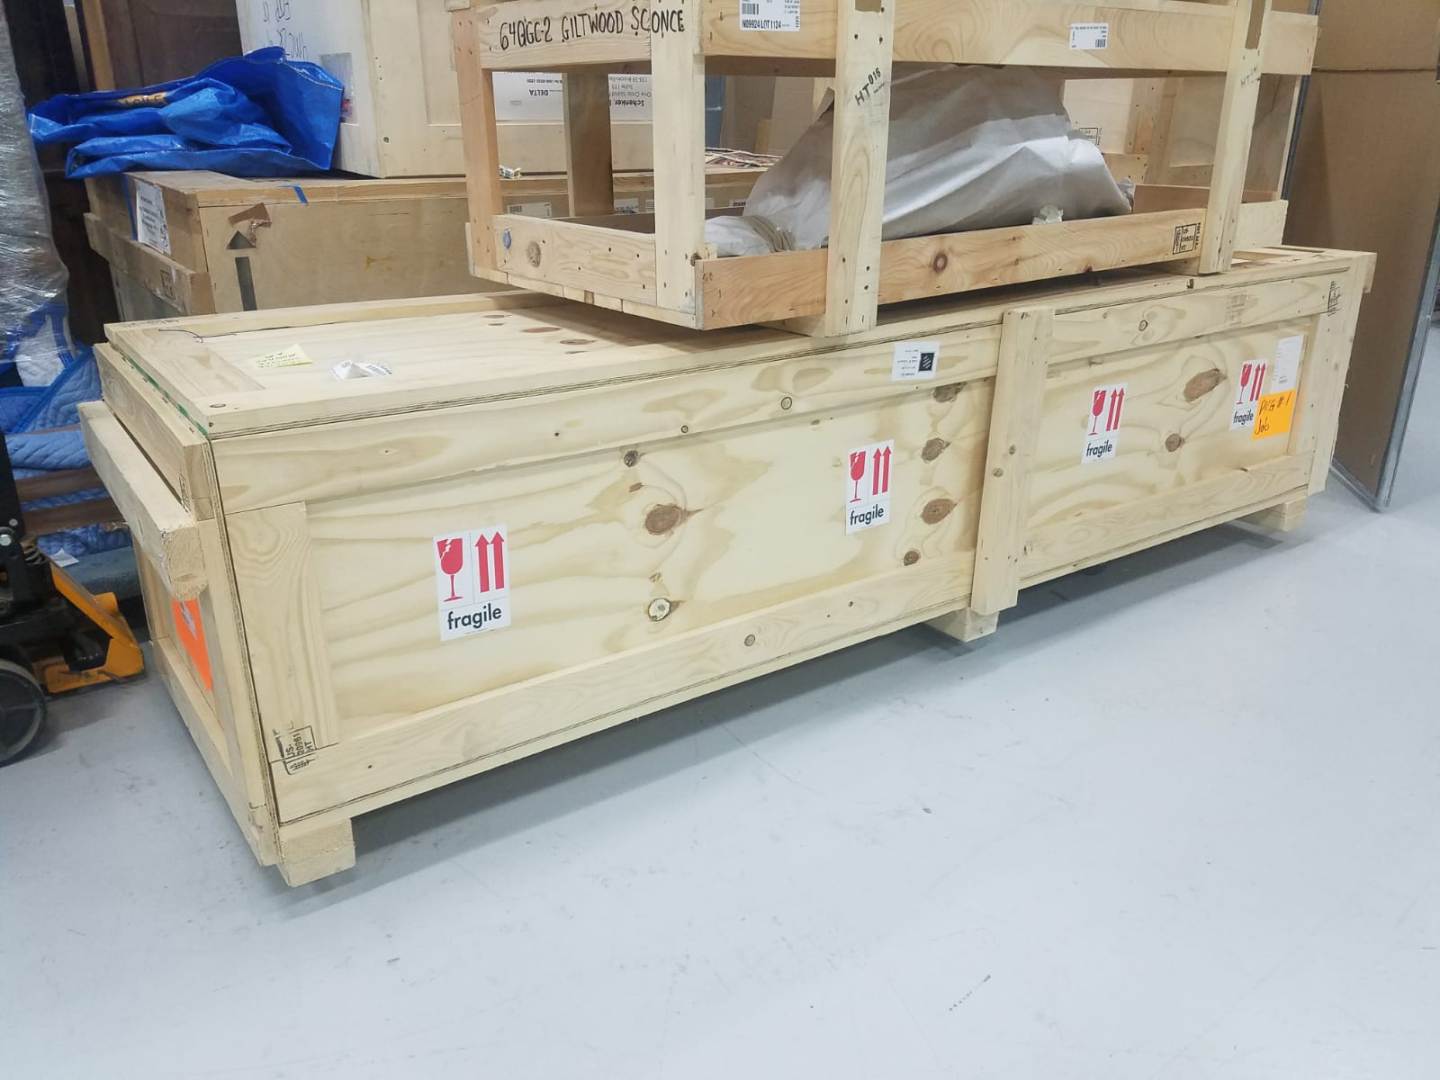 Art shipping crate